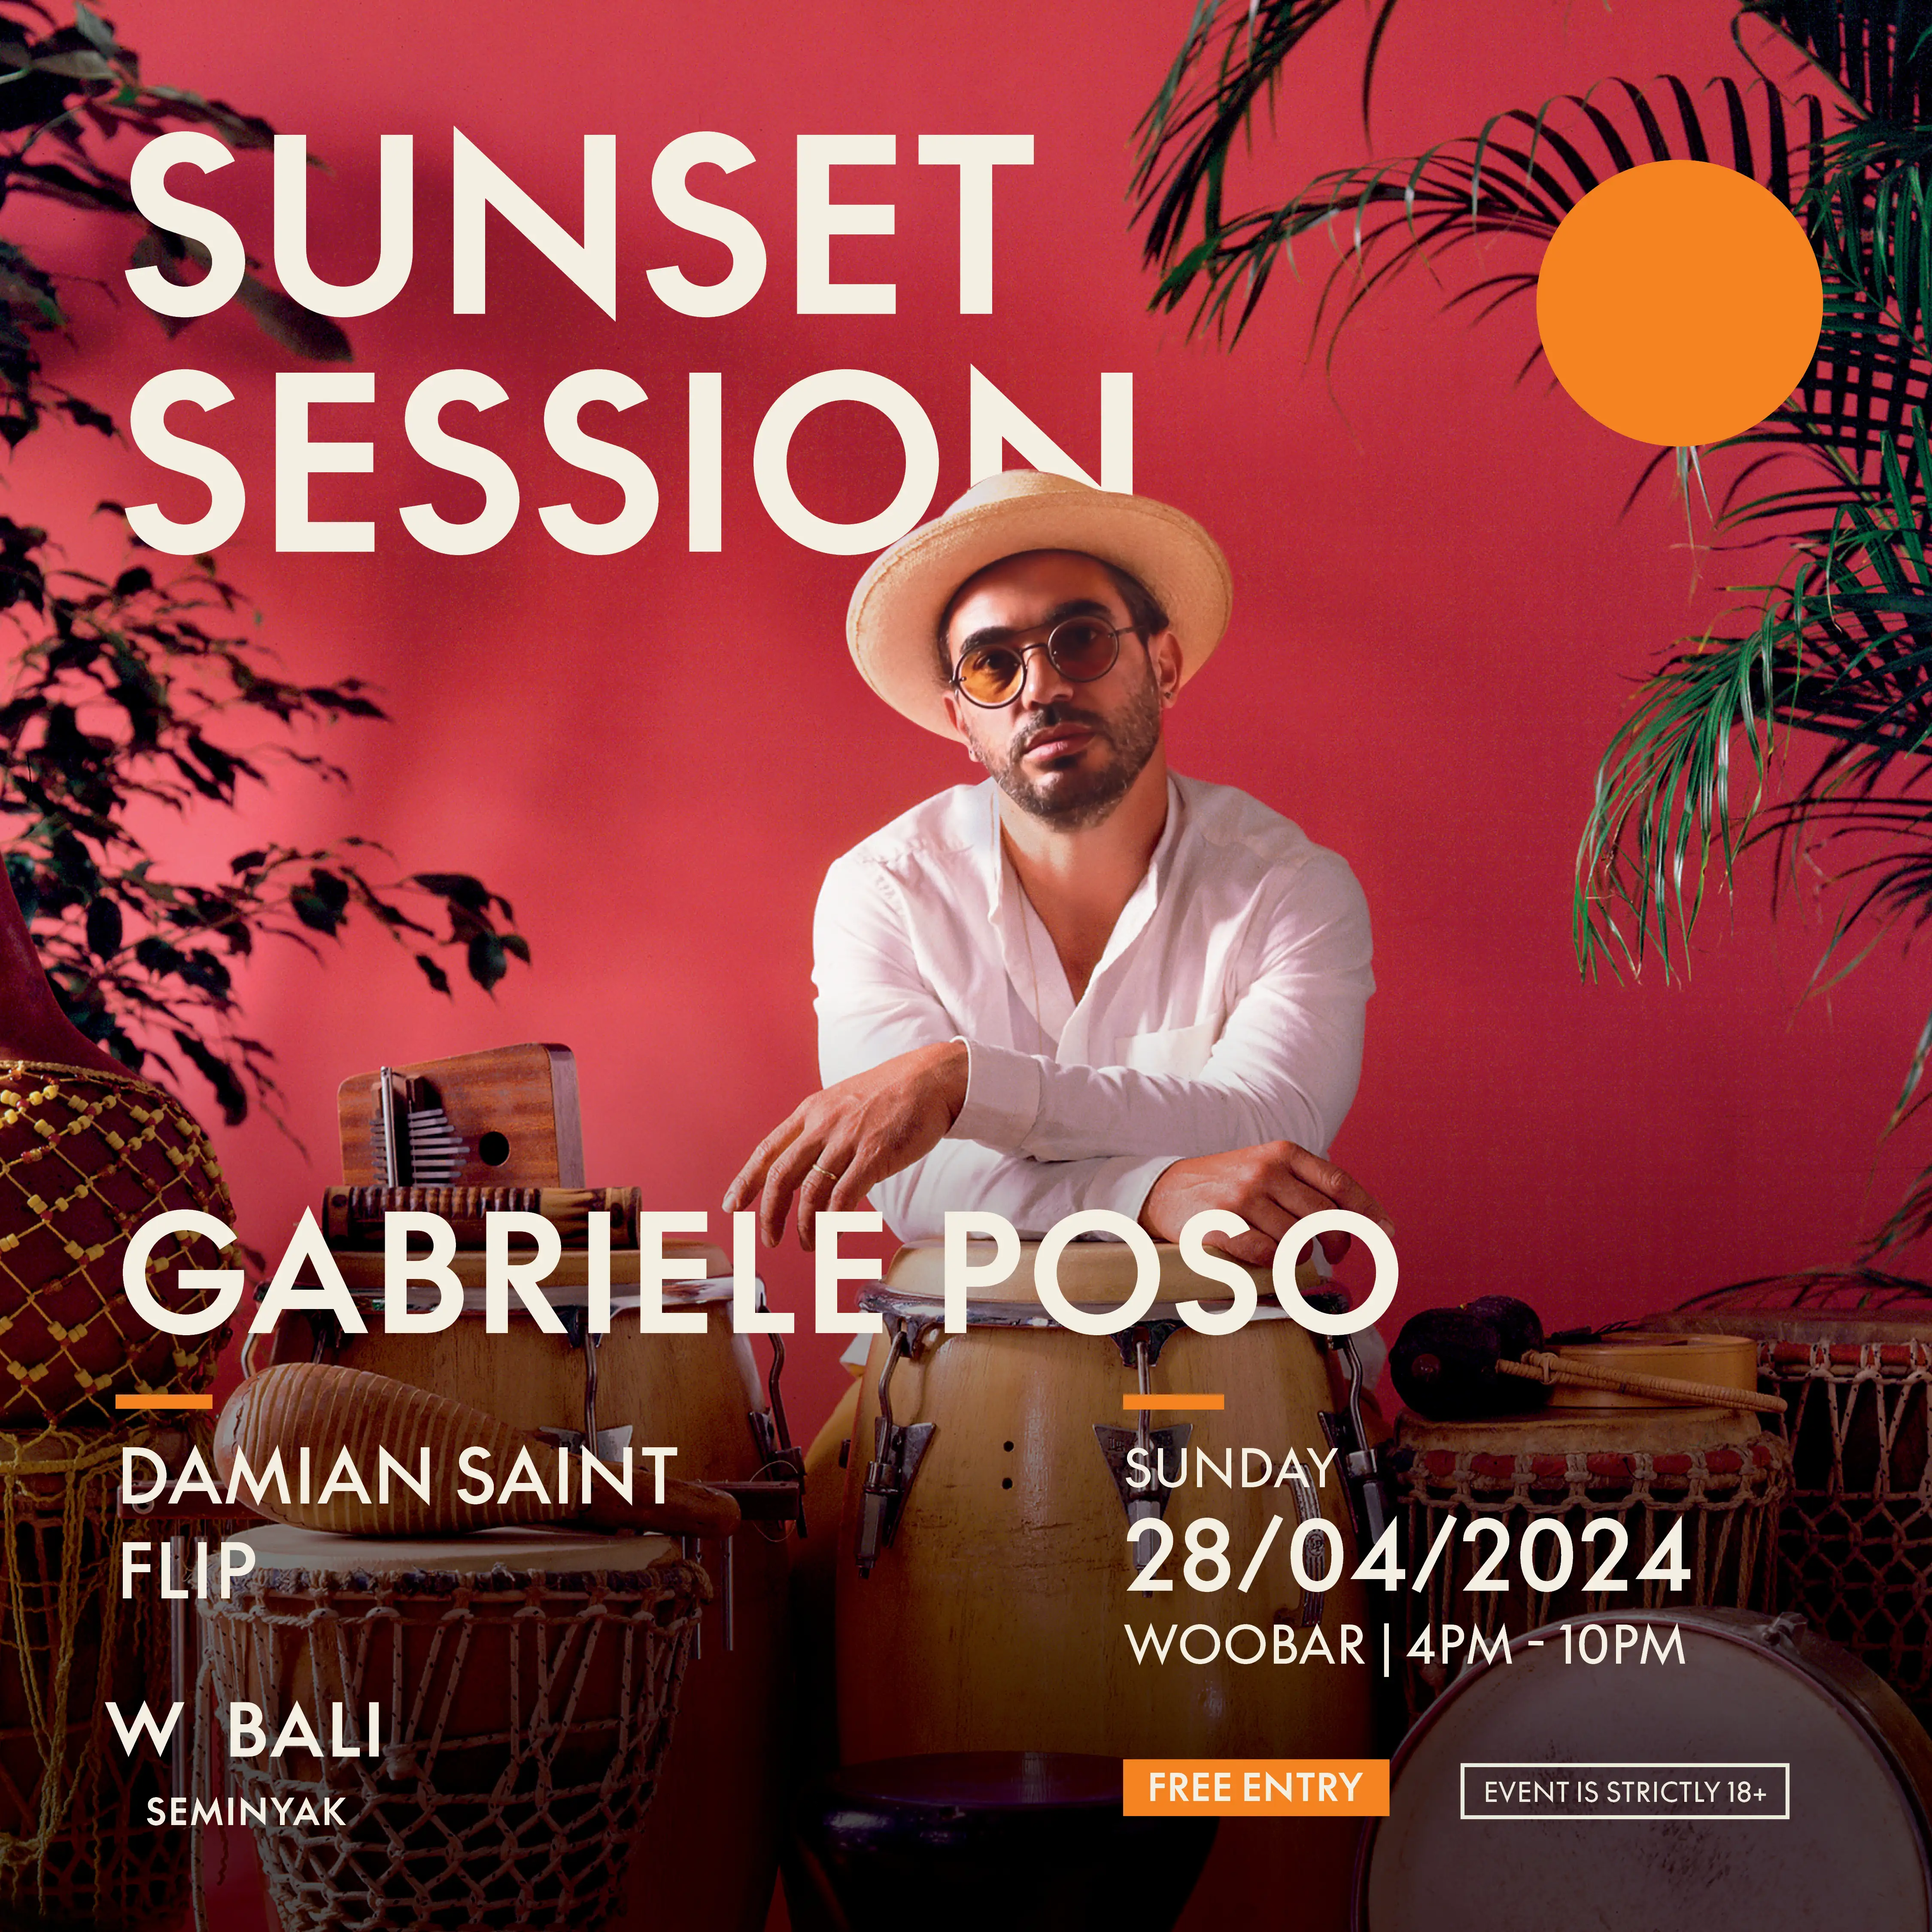 Drink Sunset Session featuring Gabriele Poso at Woobar 3830